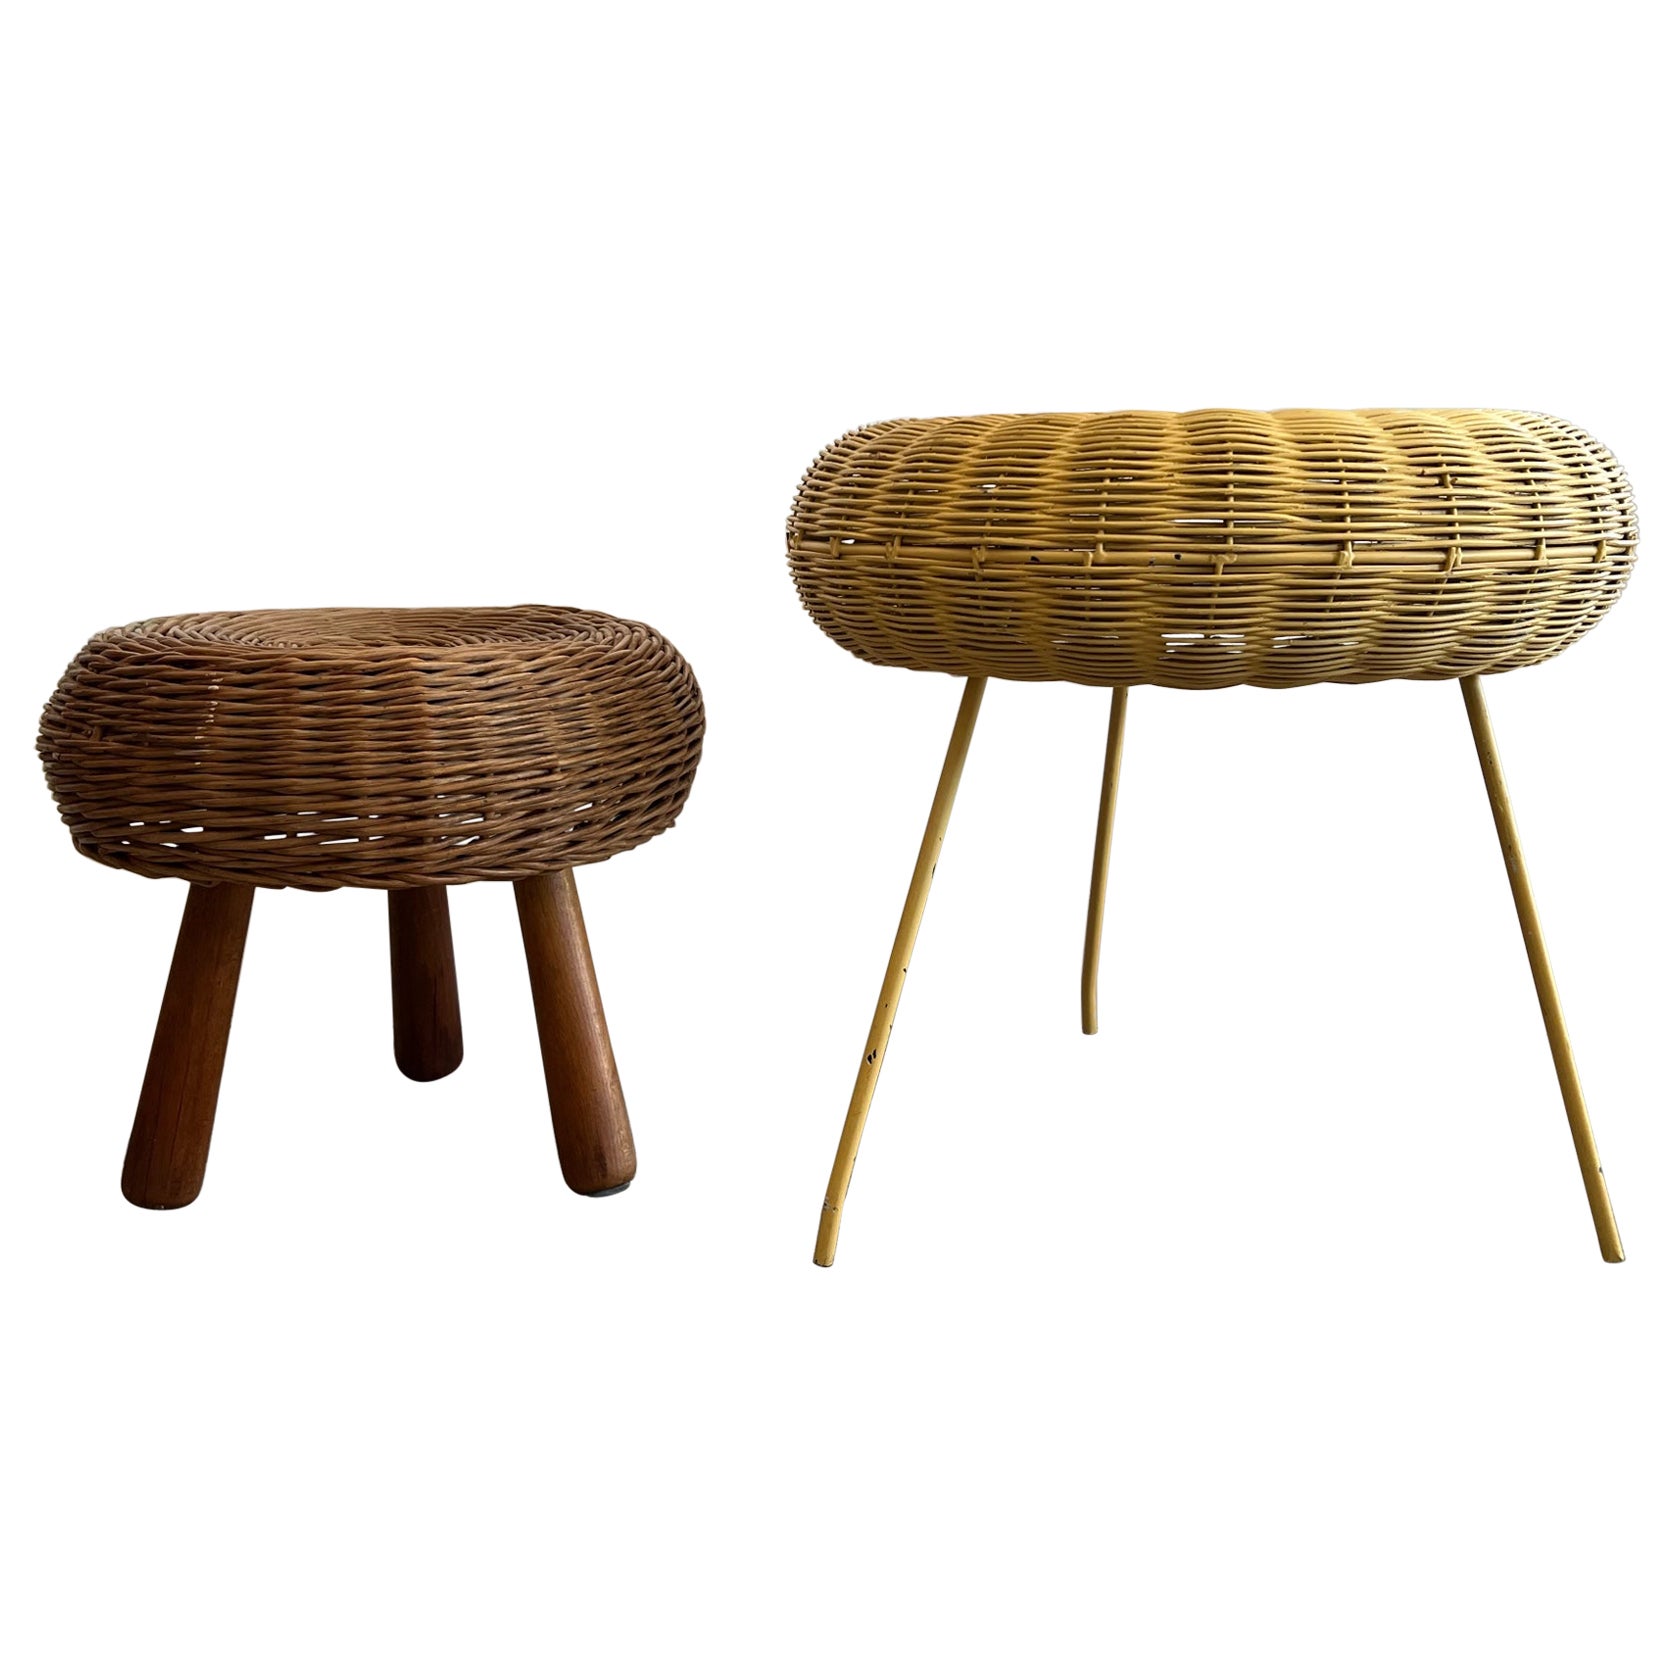 Two Vintage Wicker Stools